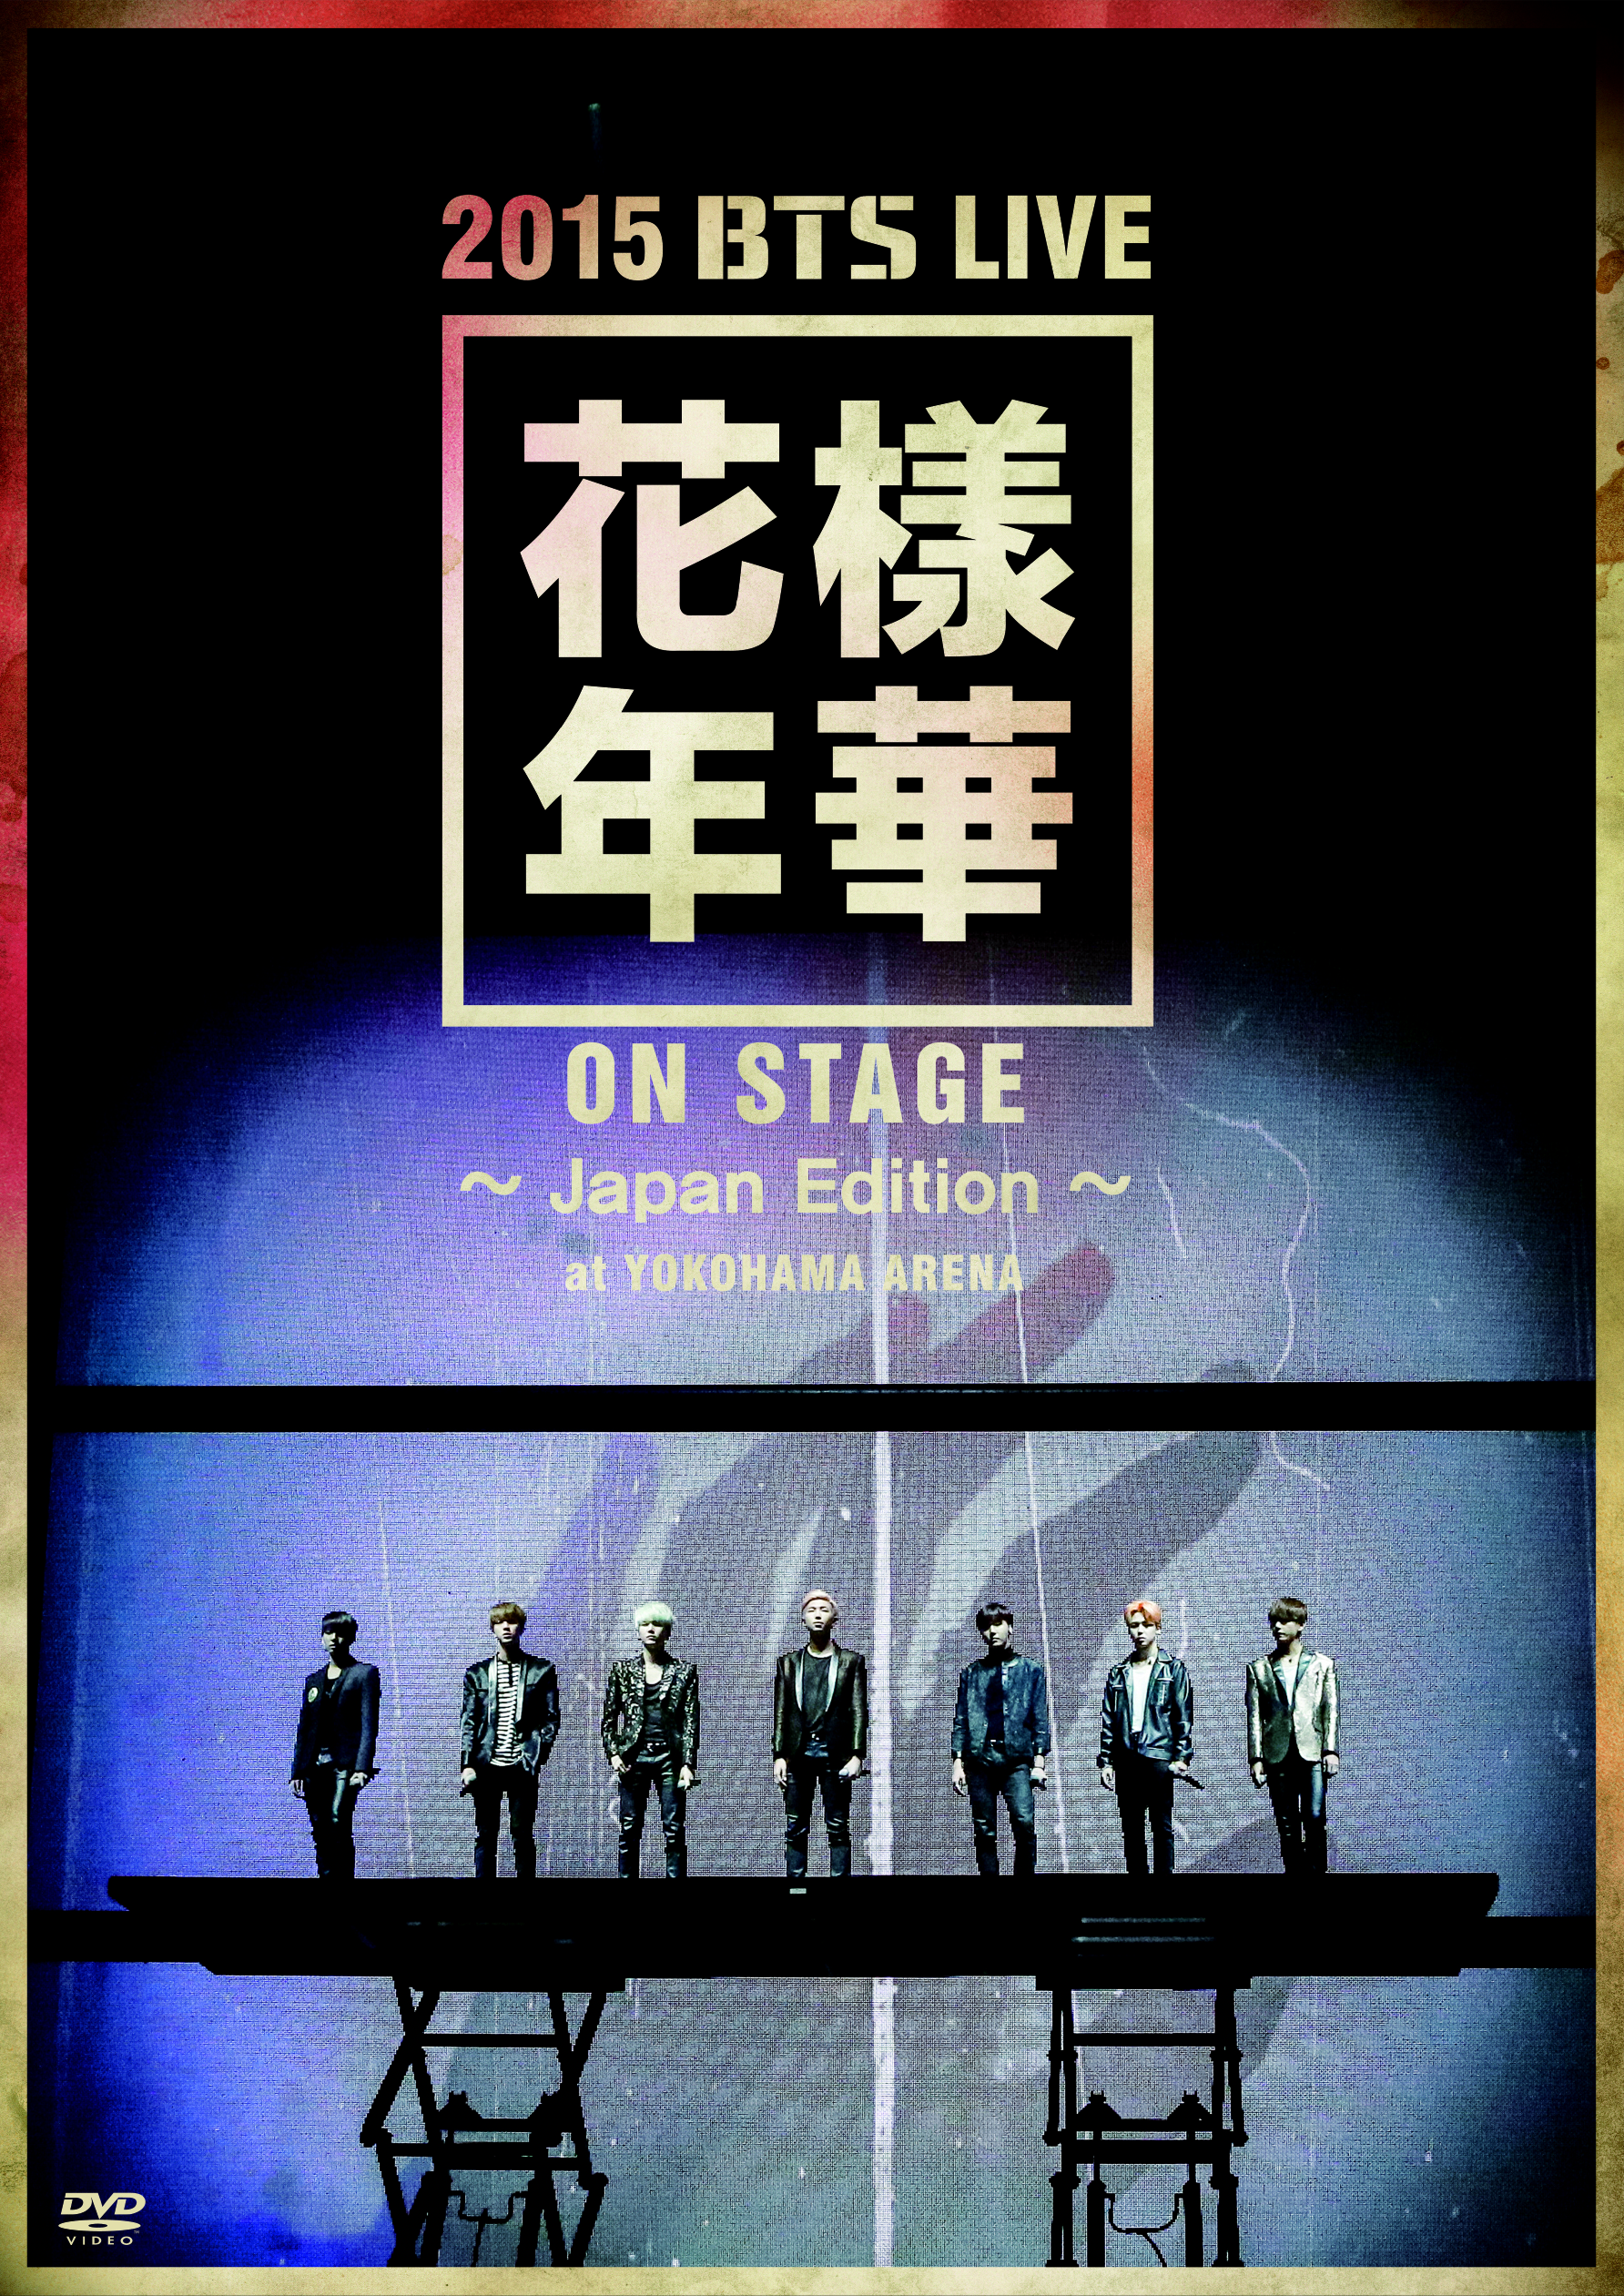 2015 BTS LIVE <In The Mood For Love ON STAGE> Japan Edition at YOKOHAMA ARENA DVD